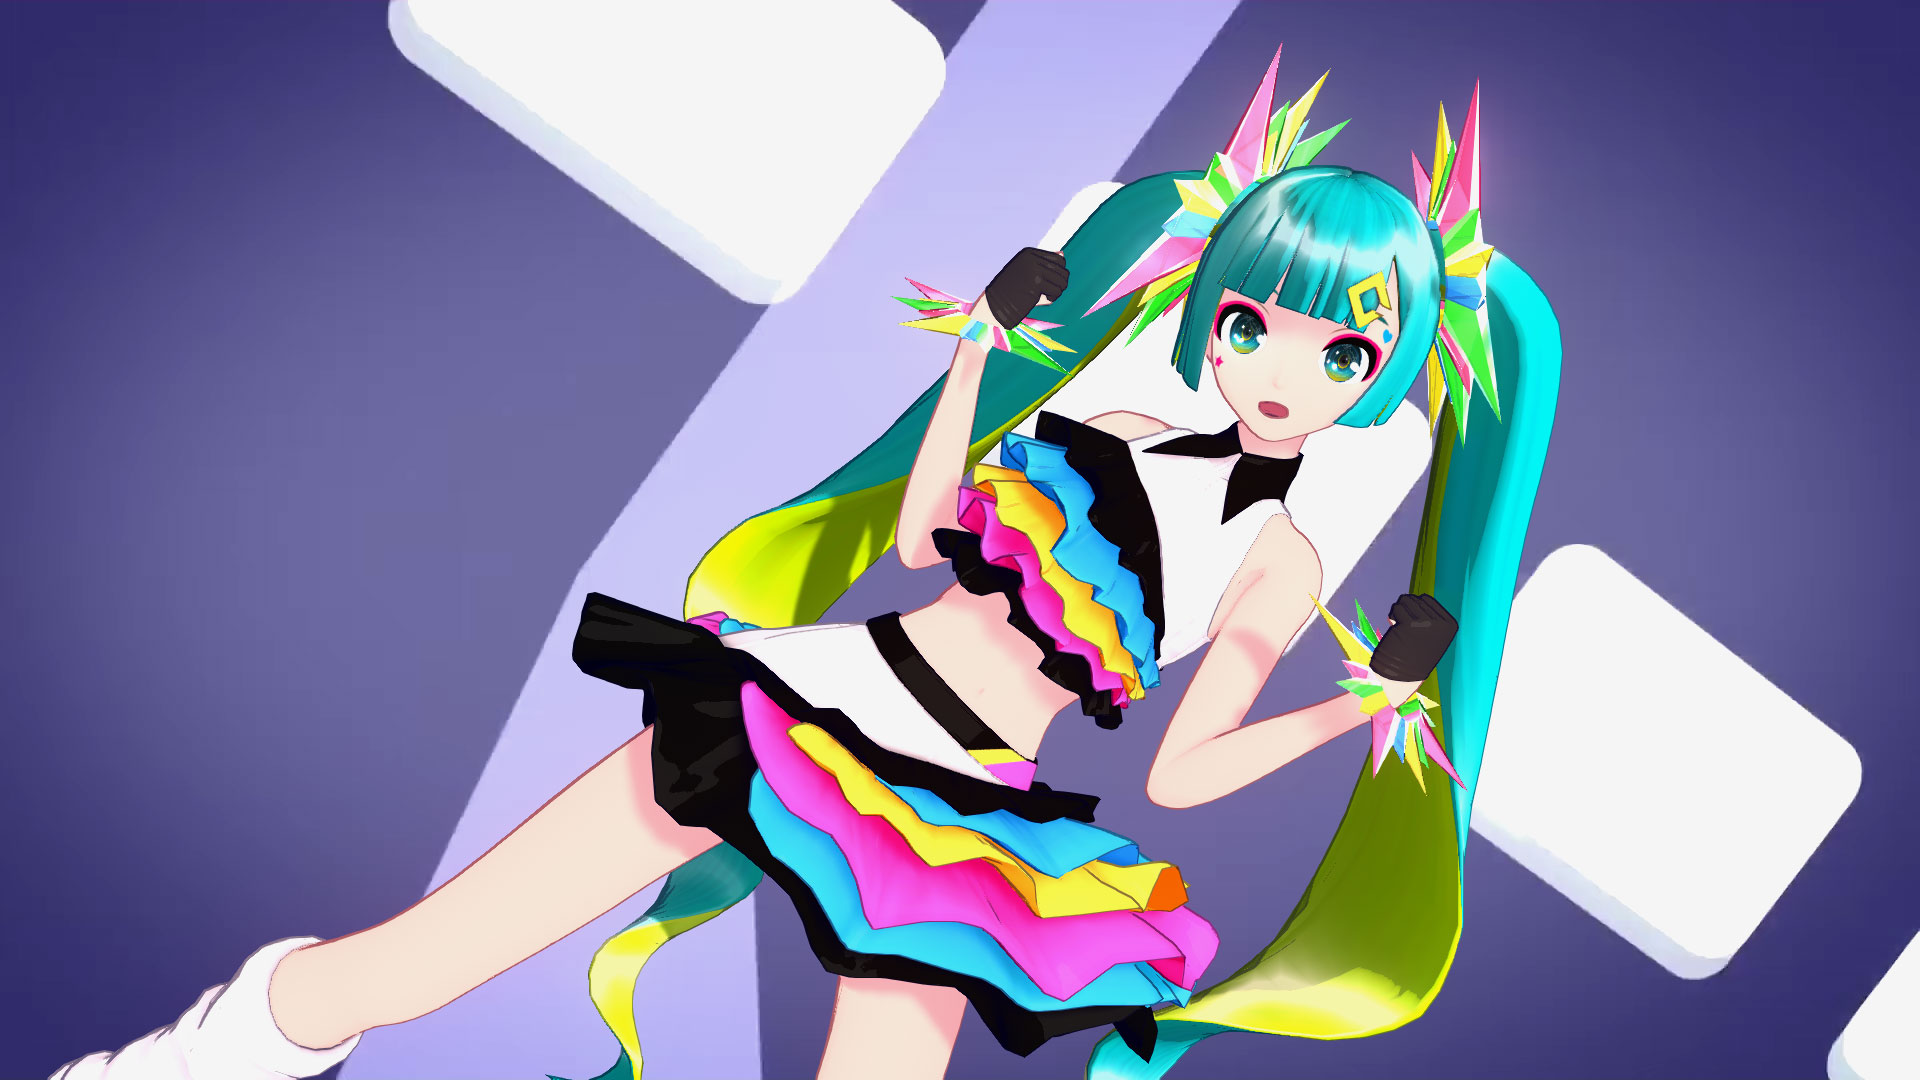 10+ Hatsune Miku: Project DIVA Mega Mix+ HD Wallpapers and Backgrounds